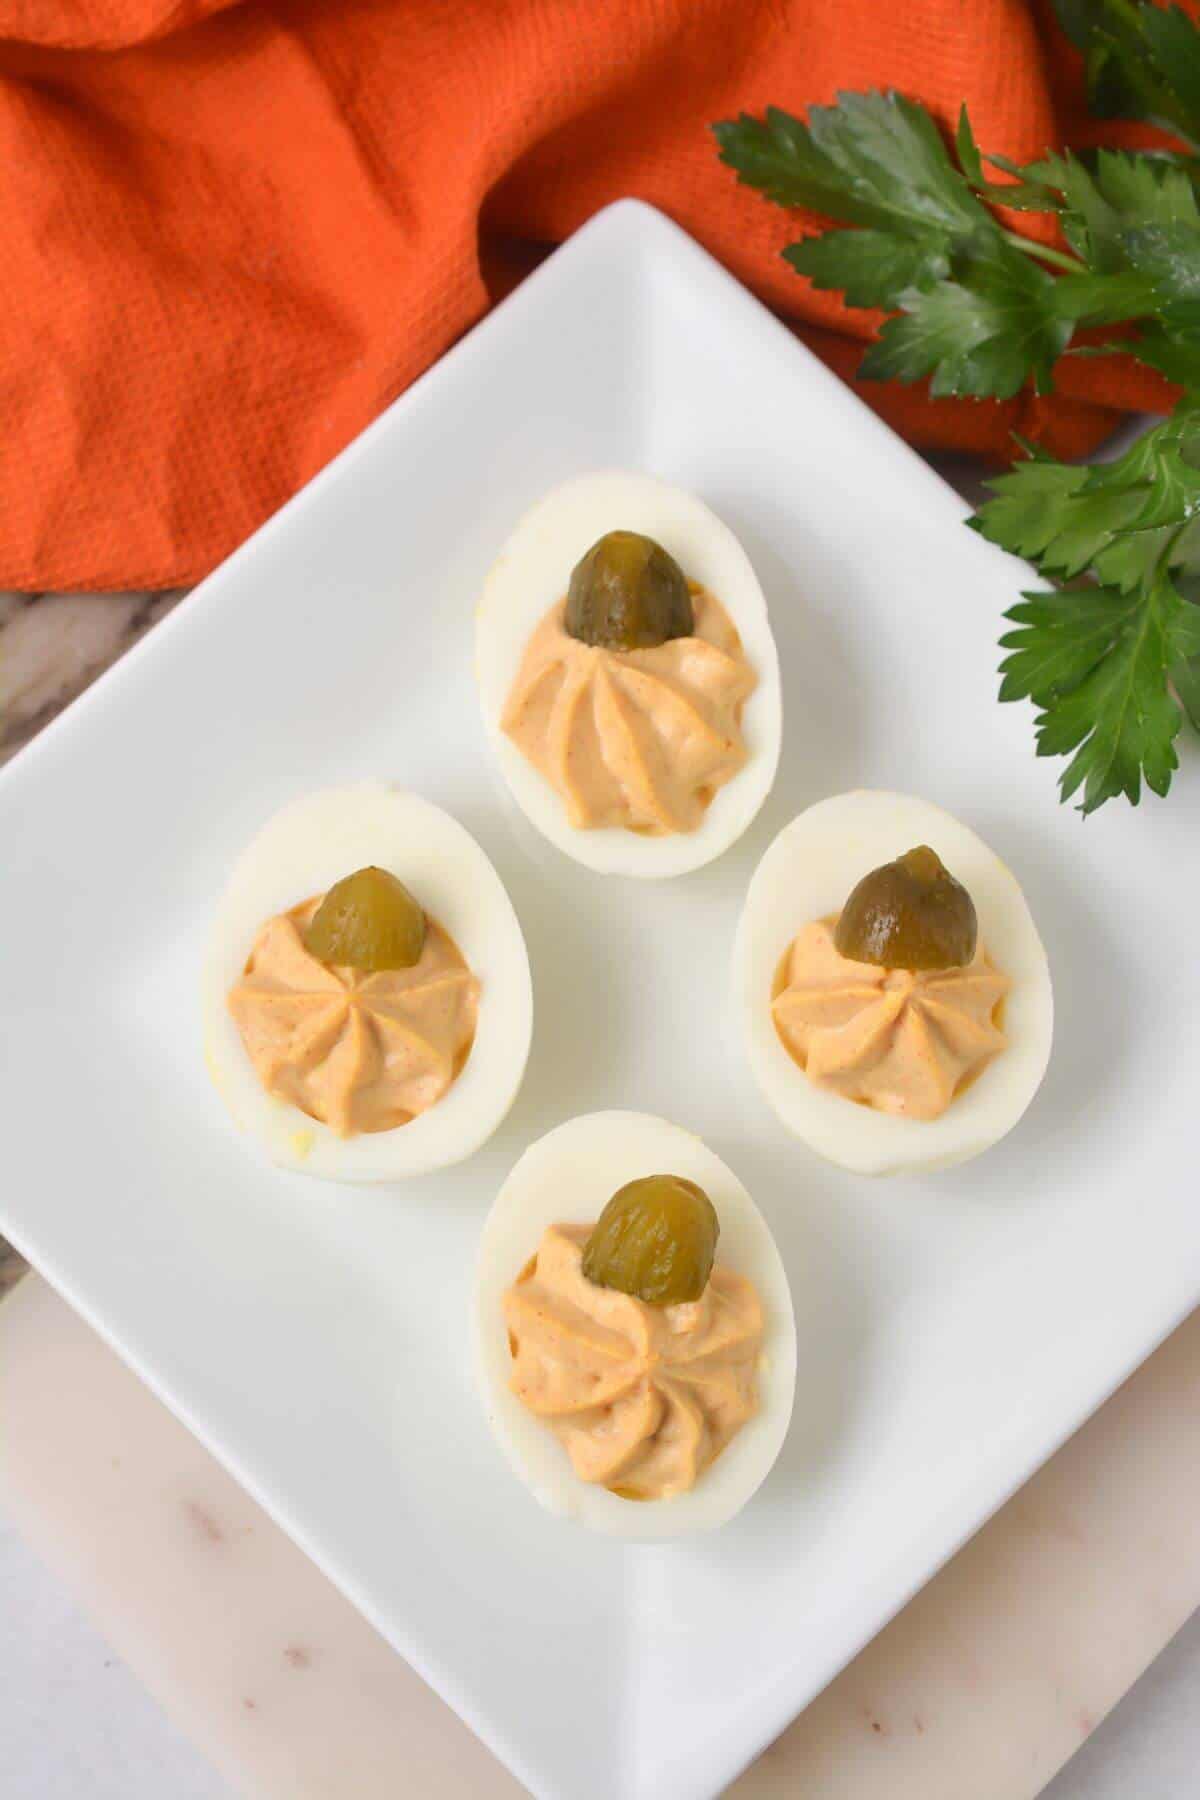 Deviled eggs for Halloween on a white plate with pumpkin.